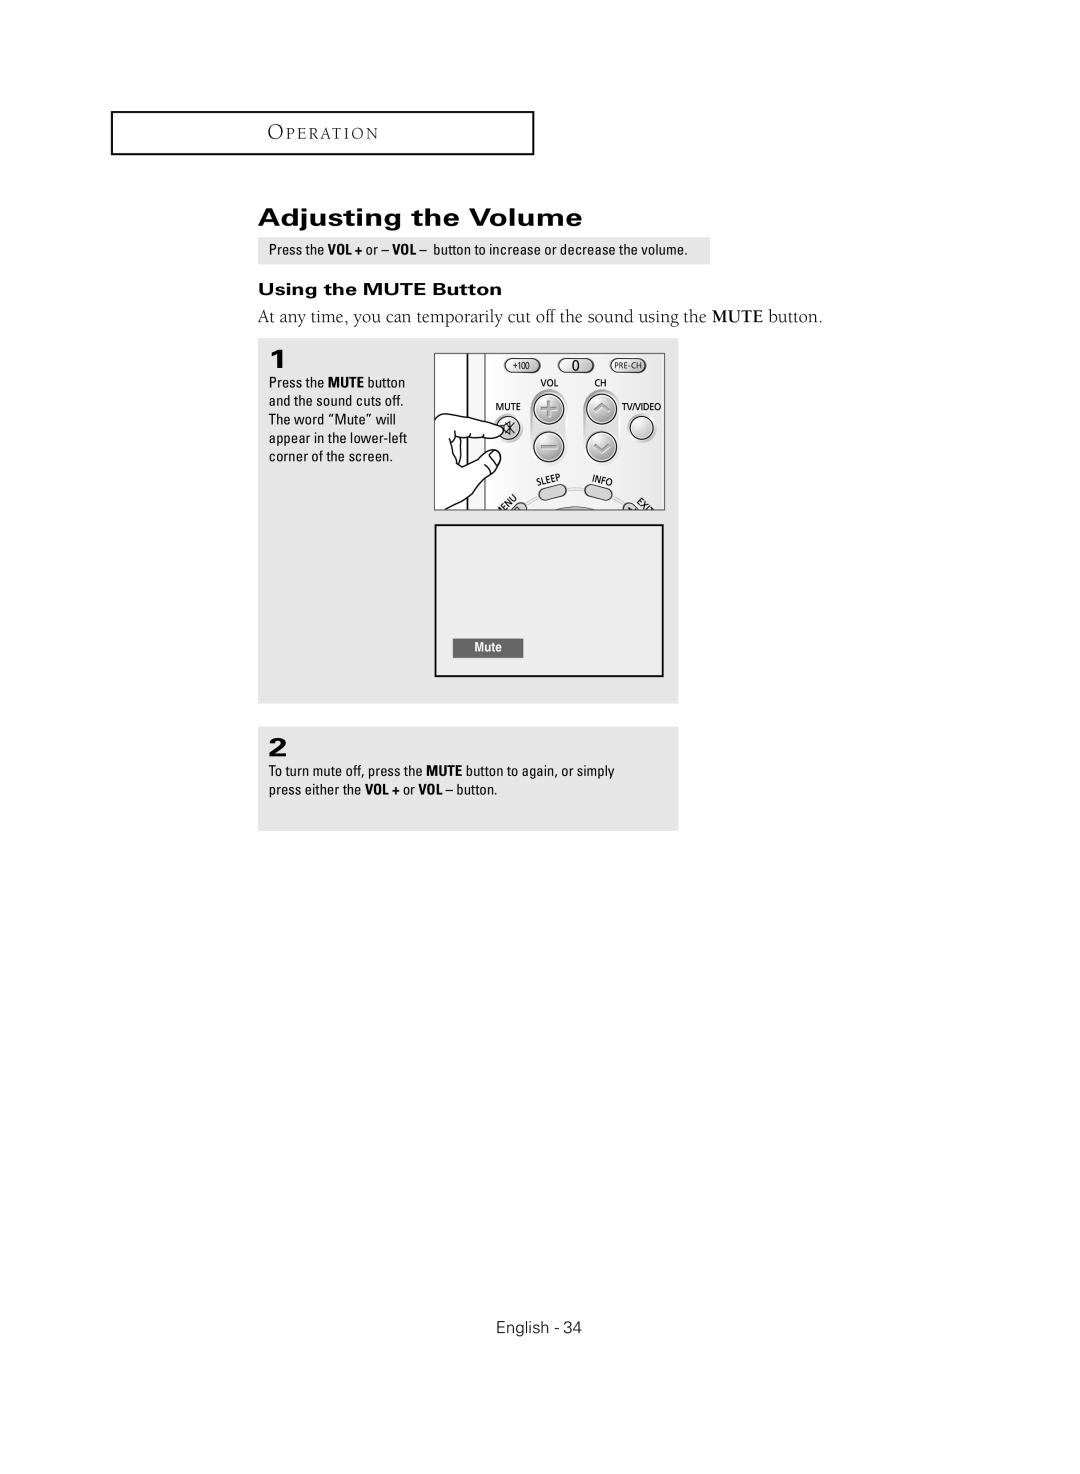 Samsung TX-R2735G manual Adjusting the Volume, O P E R At I O N, Using the MUTE Button, English, Mute 